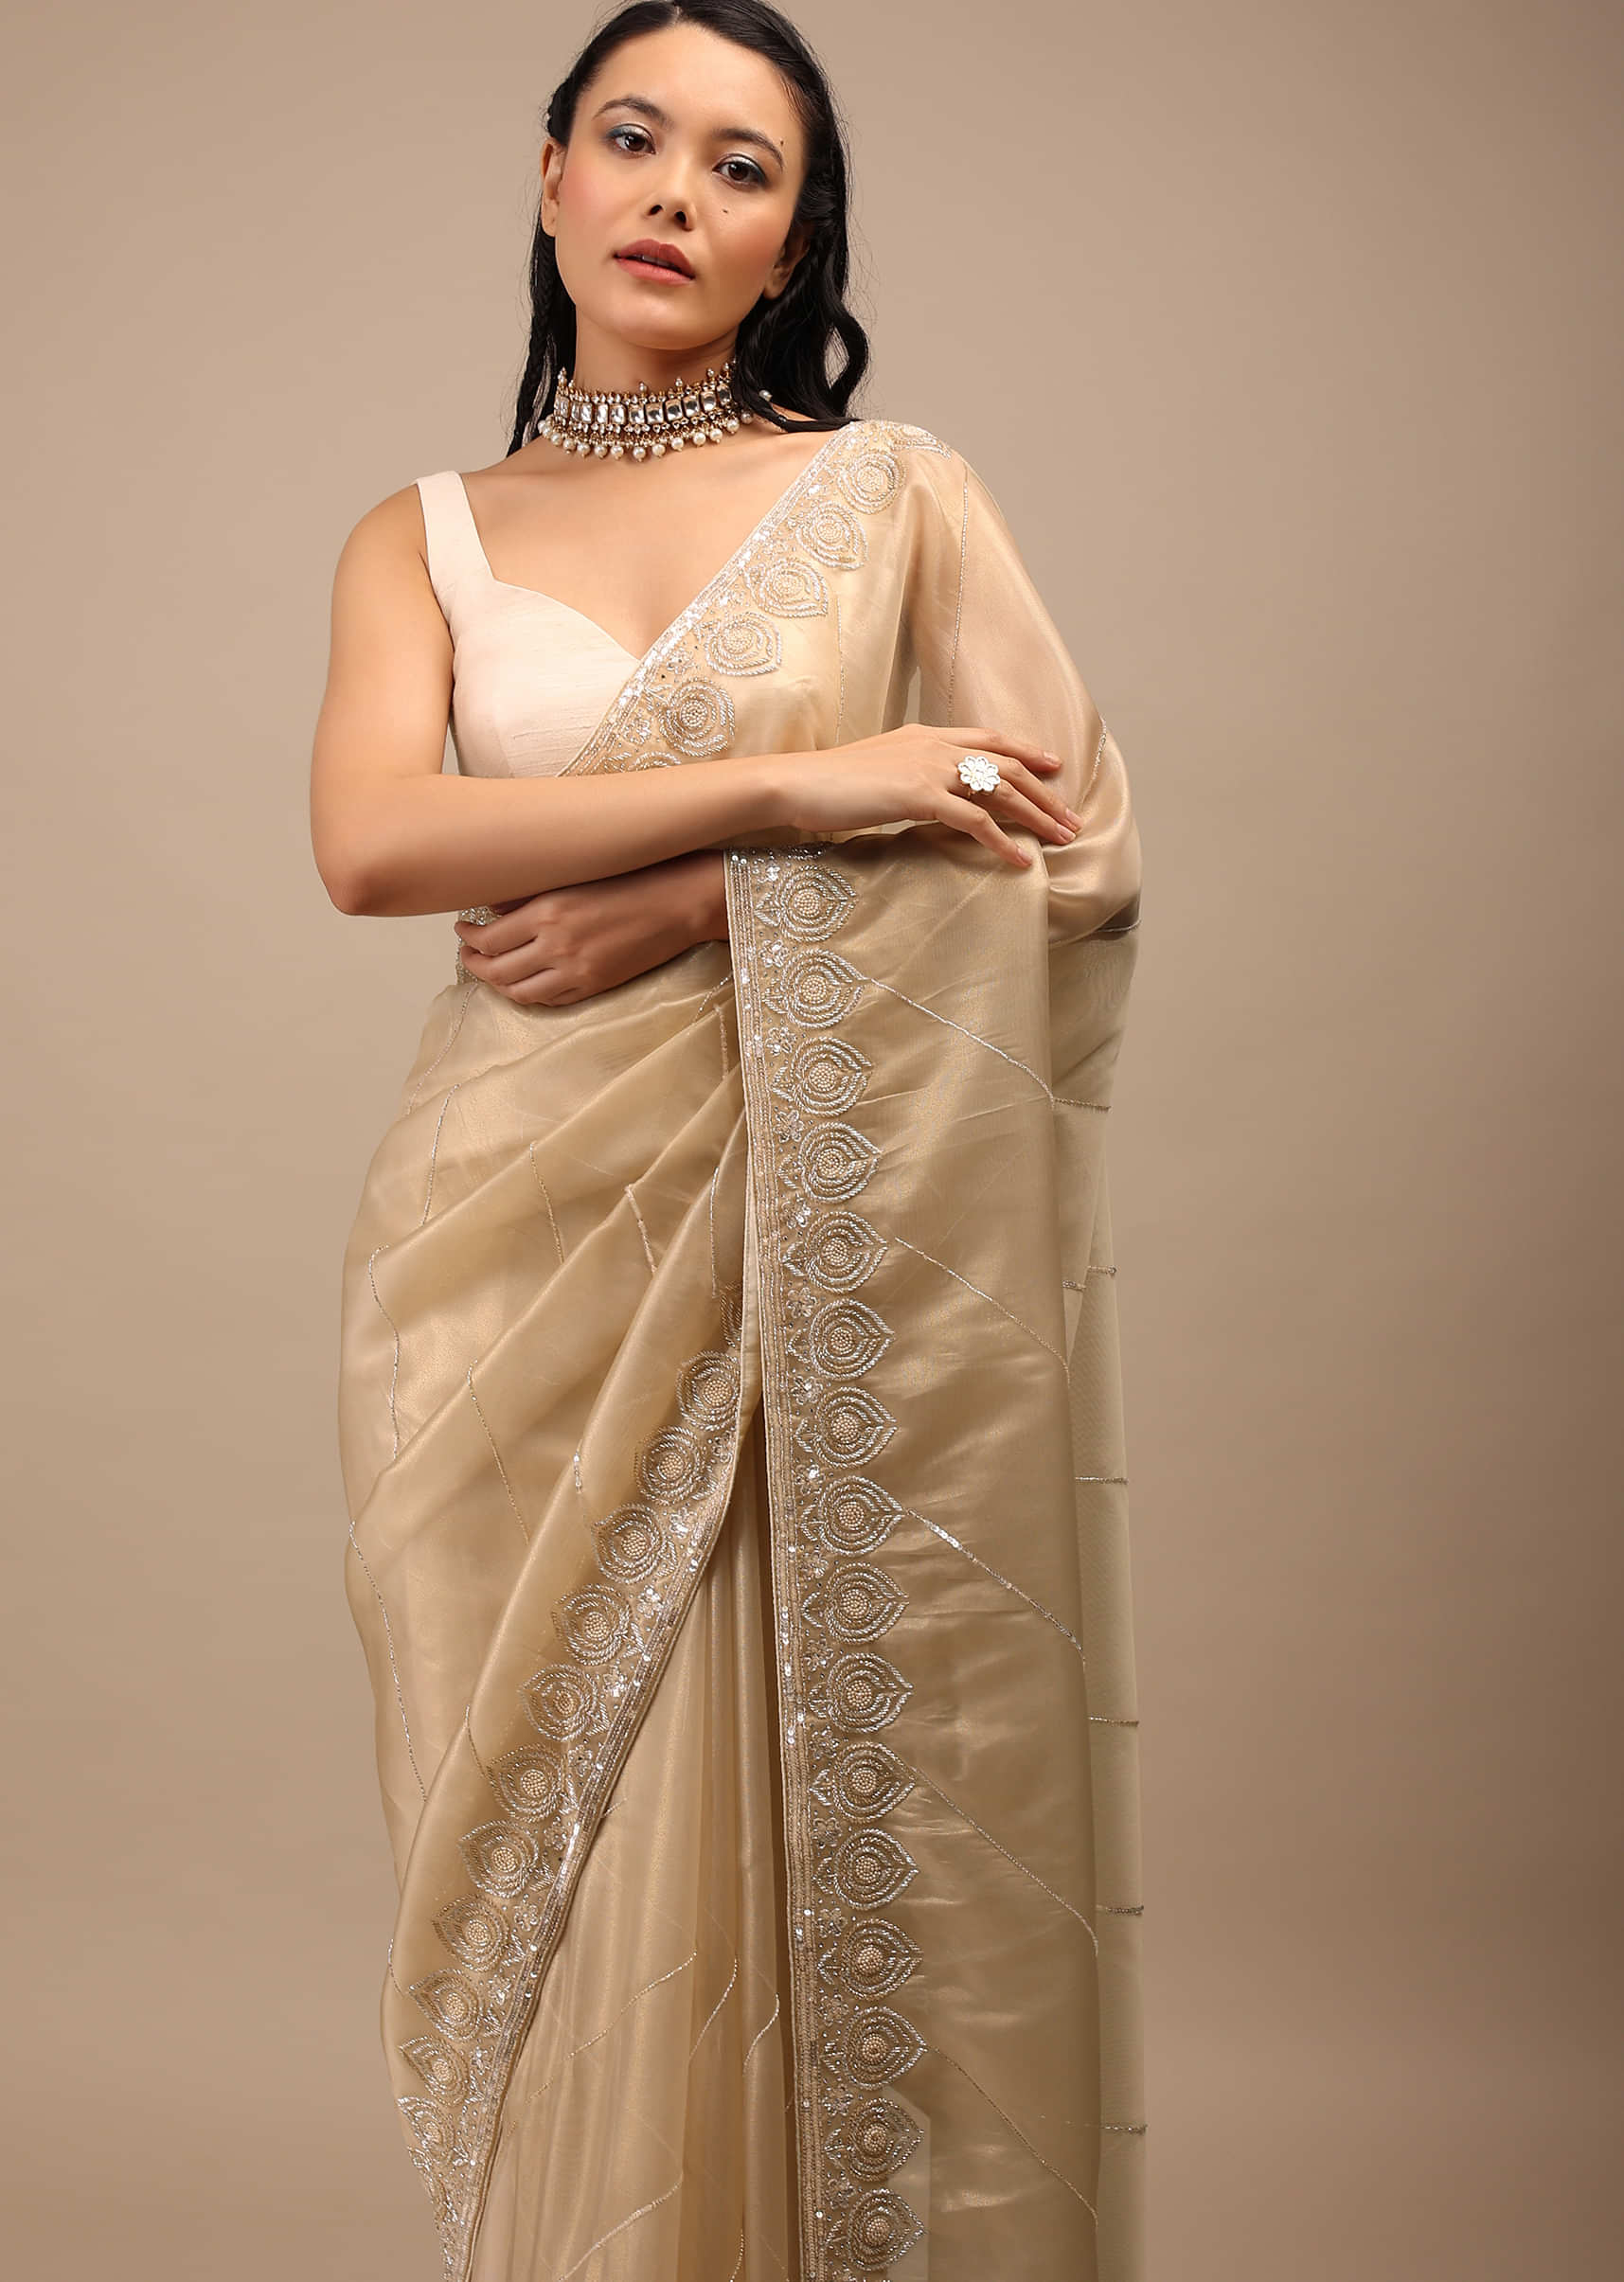 Warm Sand Brown Tissue Saree In Silver Cut Dana And Stones Embroidery Motifs Detailing On The Border